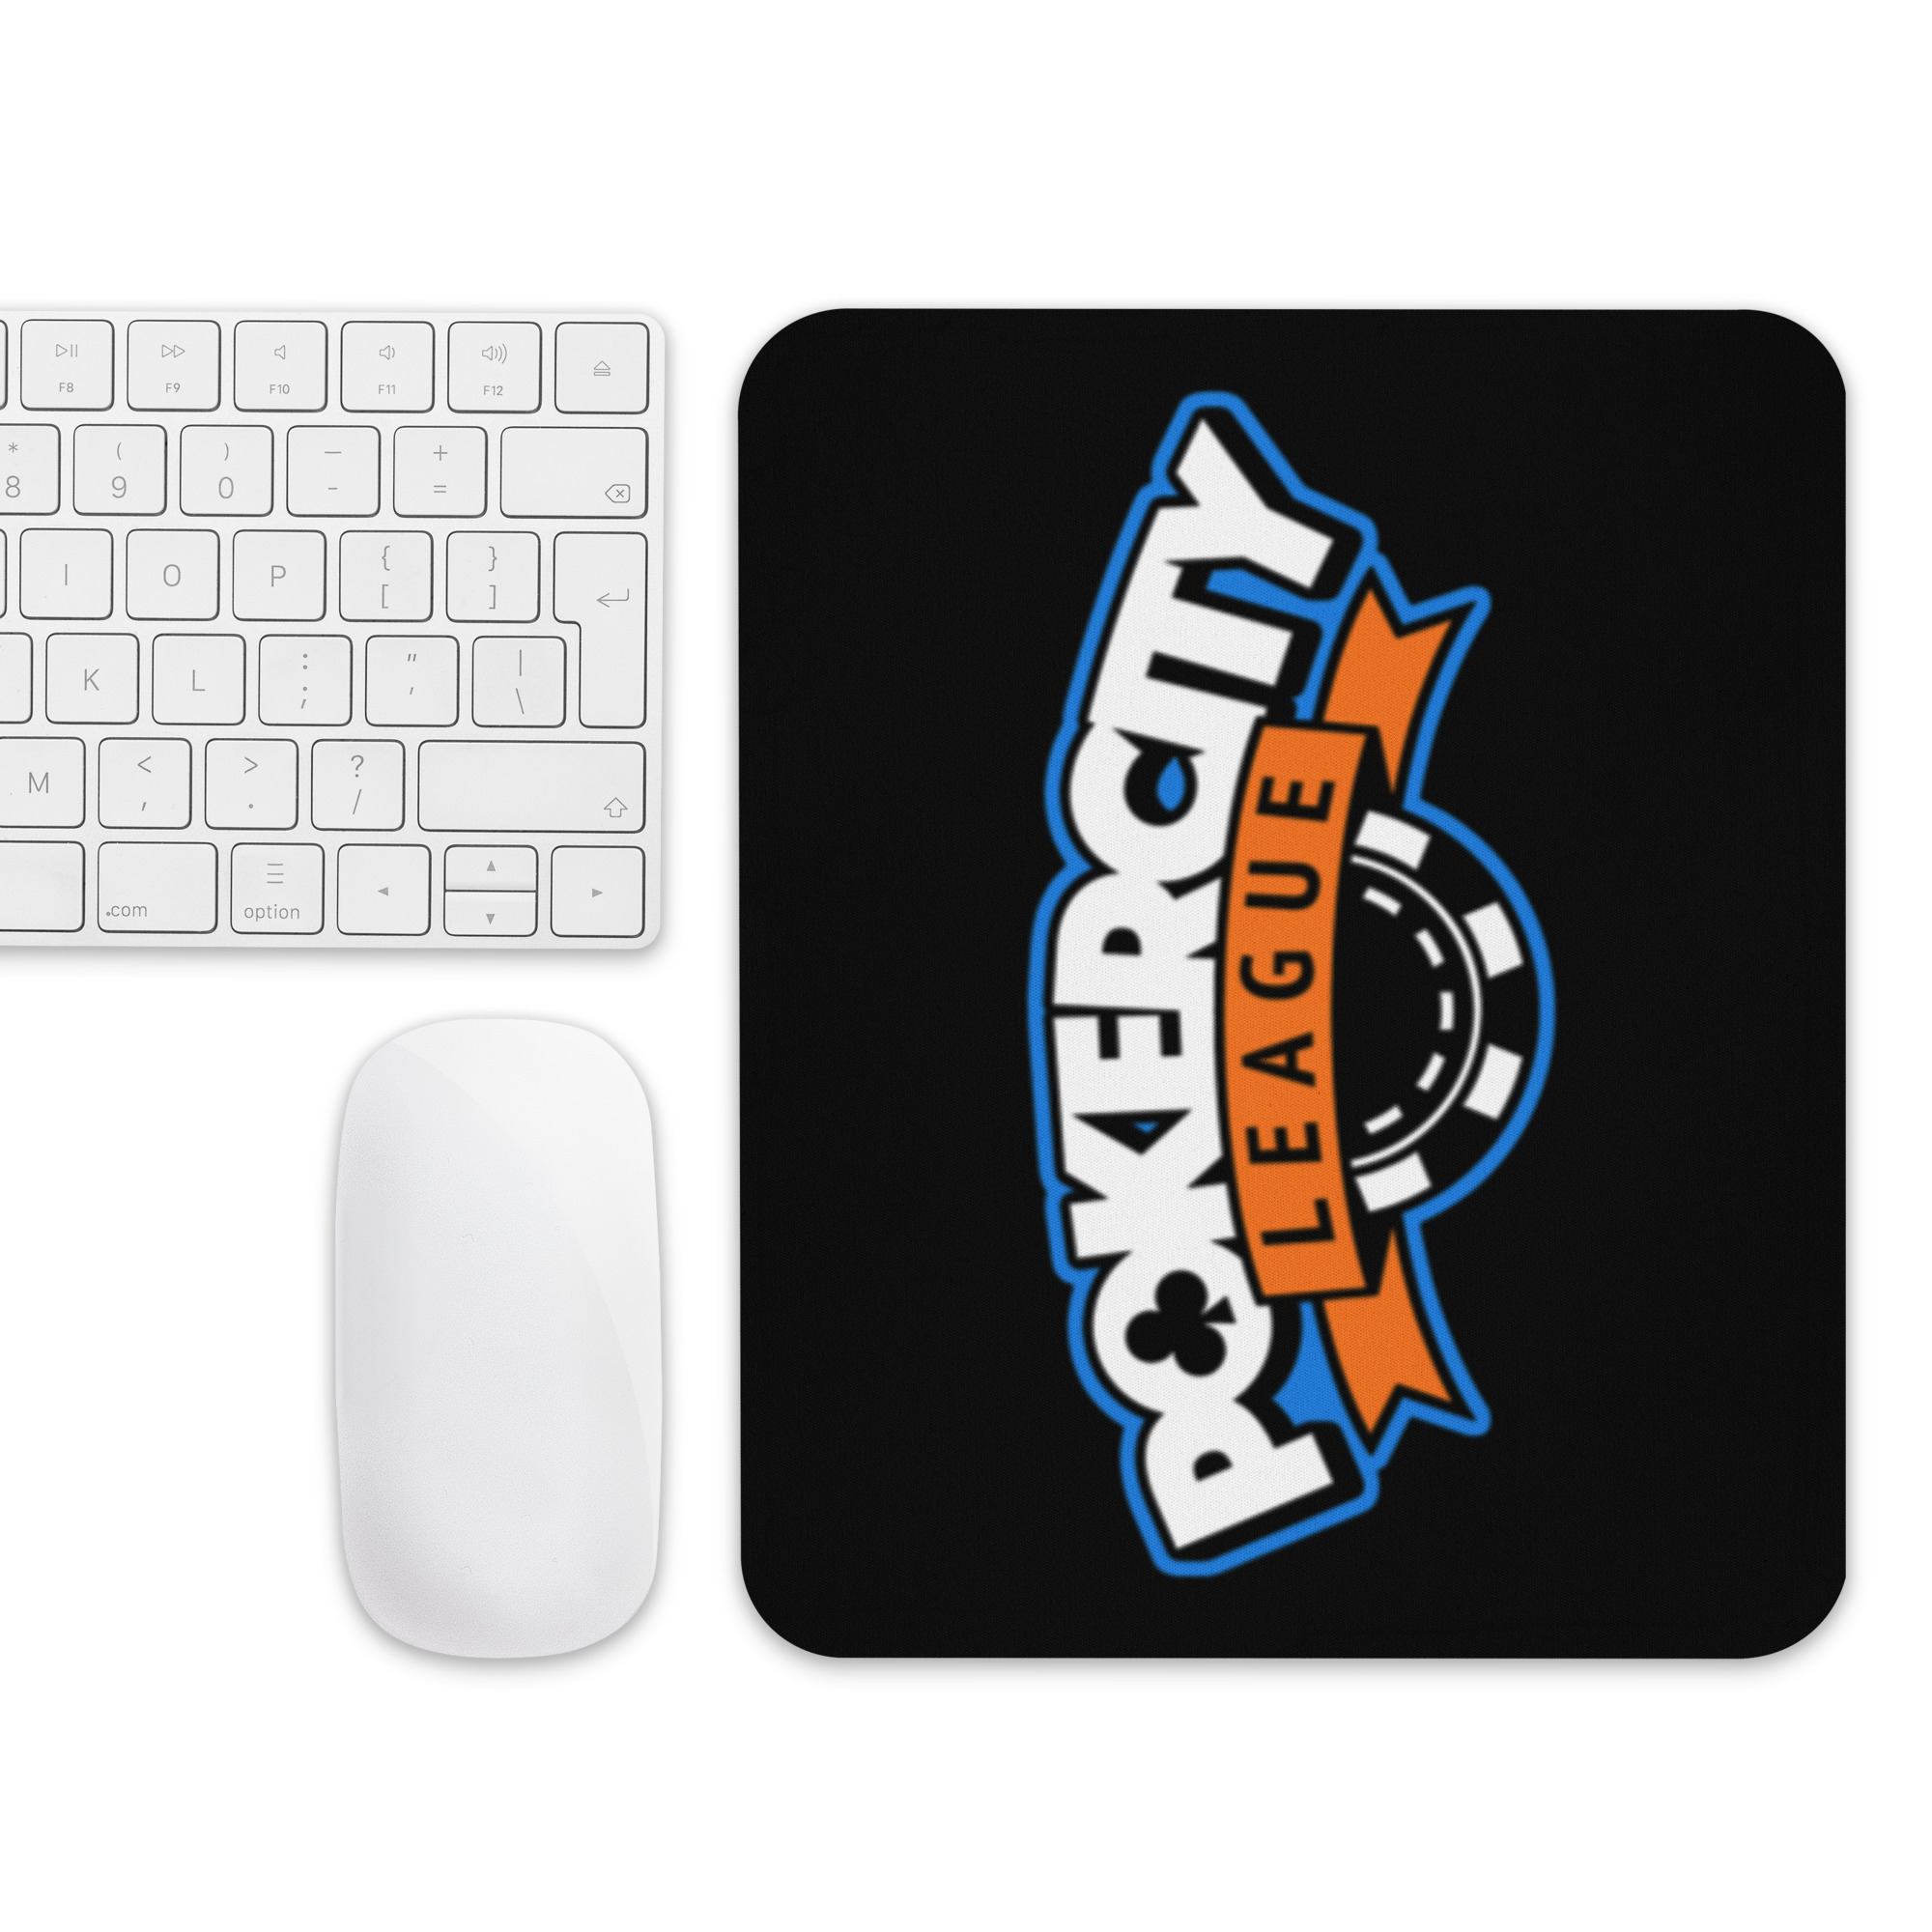 mouse-pad-white-front-654364d558a7f.jpg